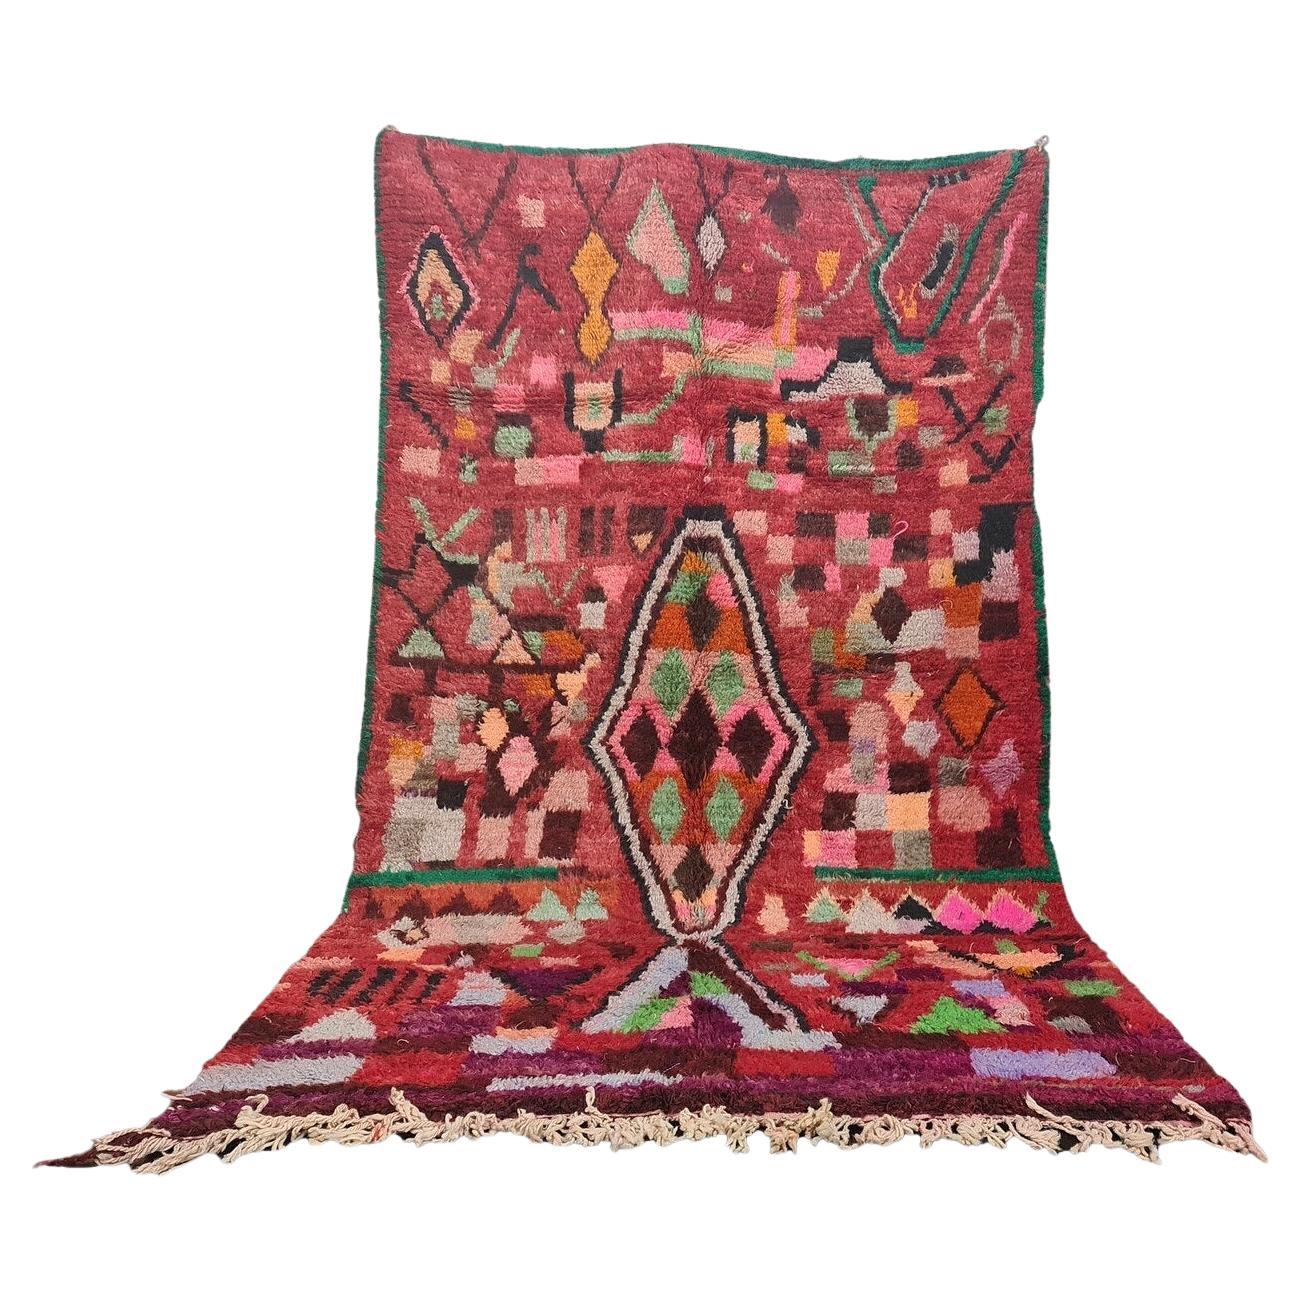 Moroccan Boujaad Rug in Red and Multi-colored Abstract Patterns